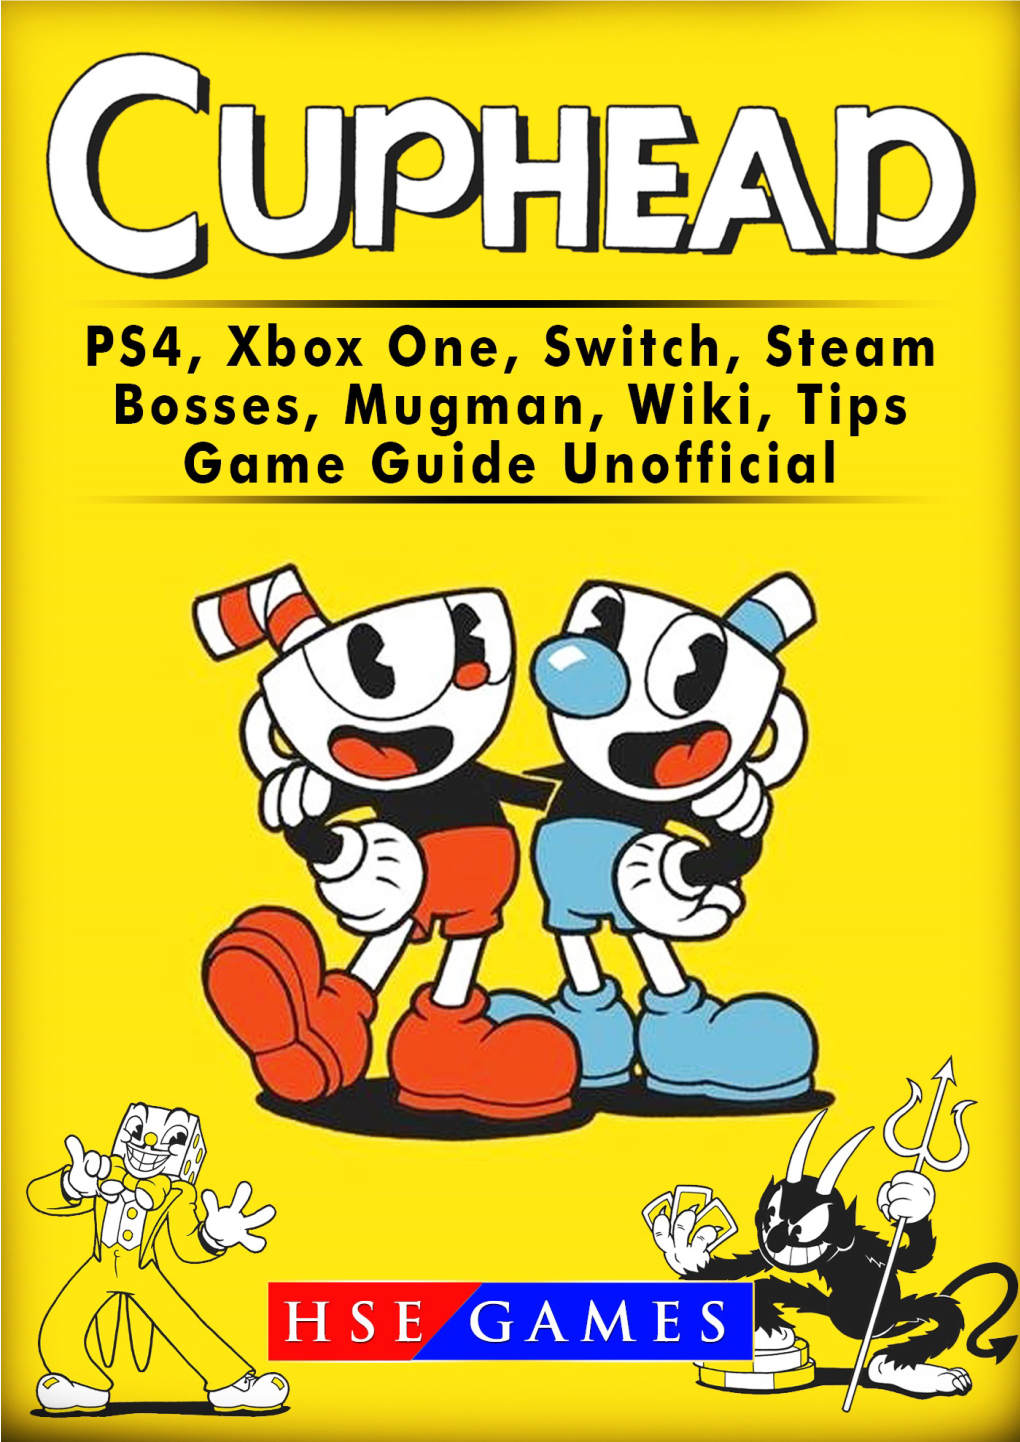 Cuphead PS4, Xbox One, Switch, Steam, Bosses, Mugman, Wiki, Tips, Game Guide Unofficial